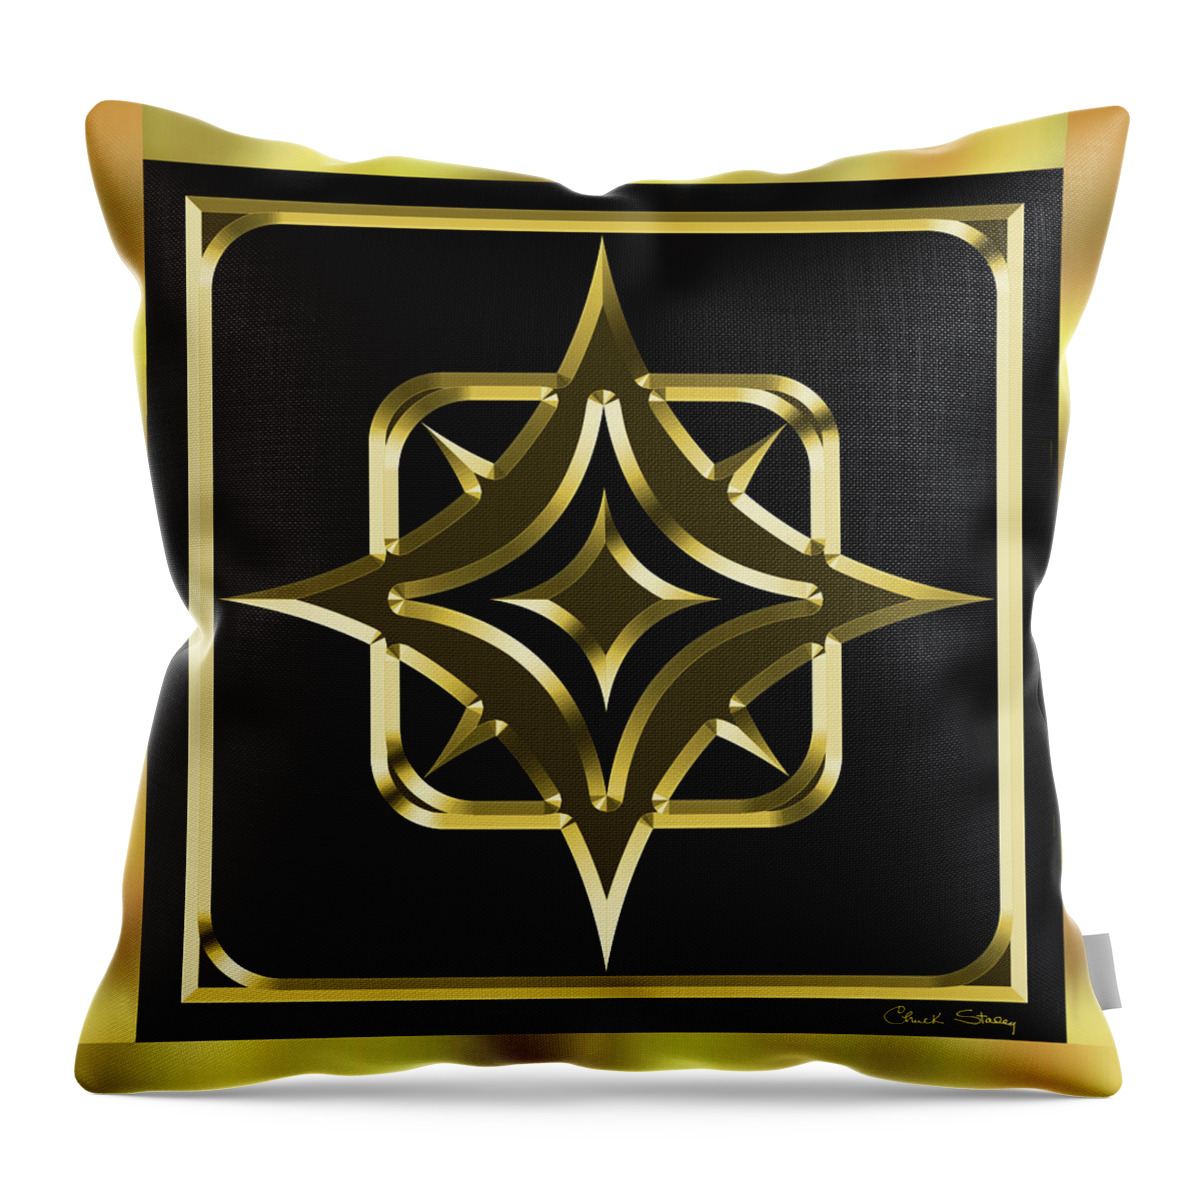 Black And Gold 10 - Chuck Staley Throw Pillow featuring the digital art Black and Gold 10 by Chuck Staley